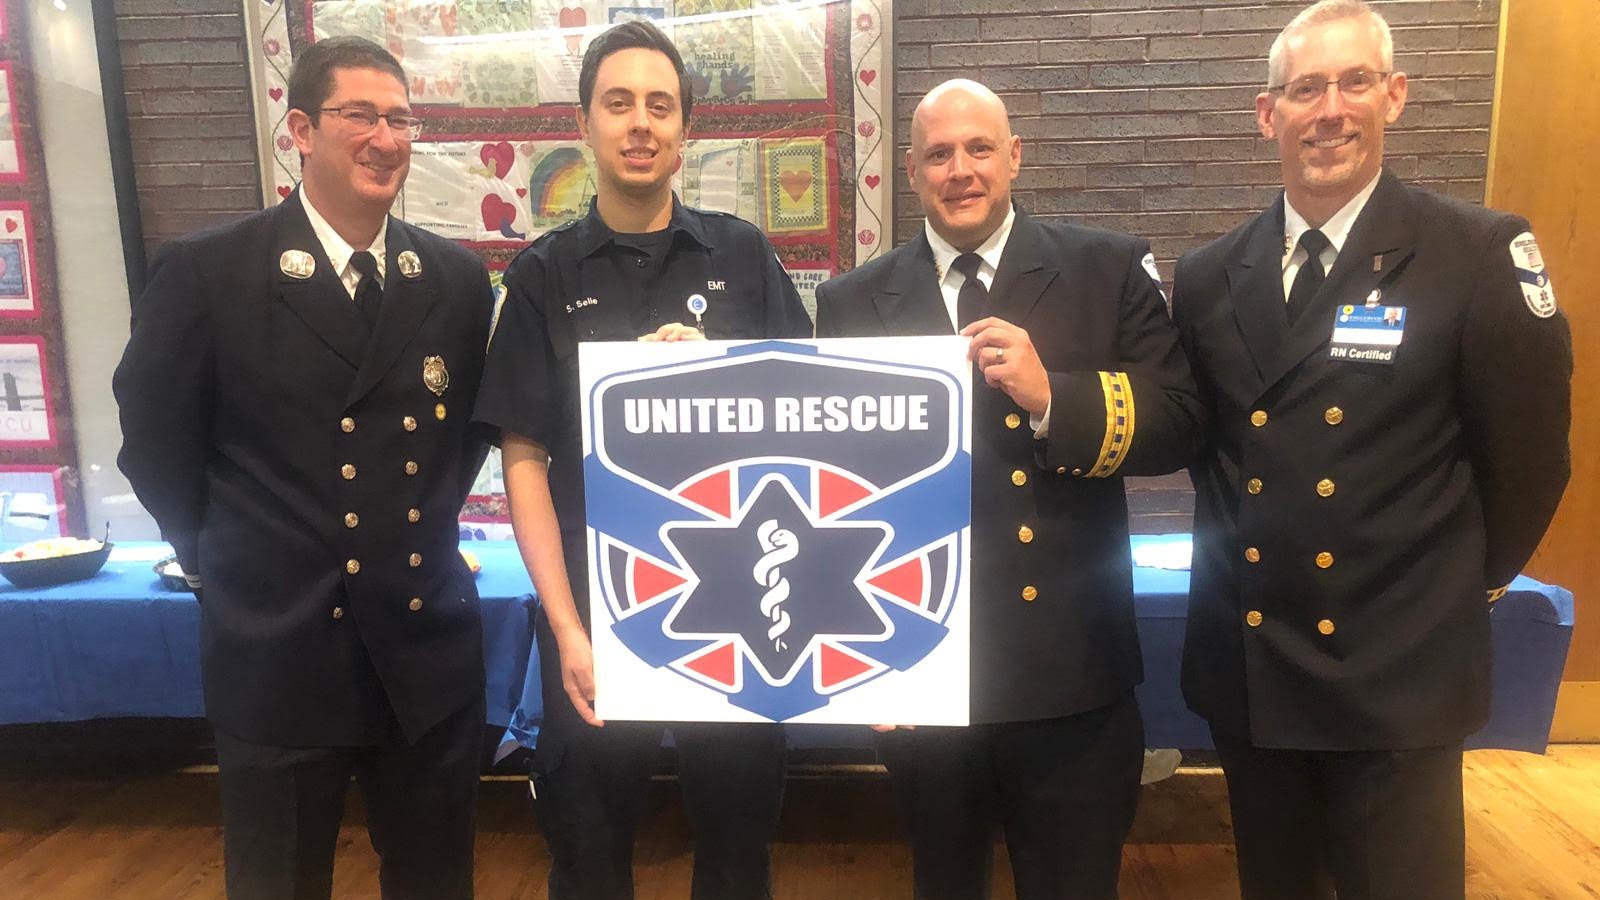 Officials at the September 19, 2019 kickoff event of United Rescue Englewood at Englewood Health. Photo: courtesy